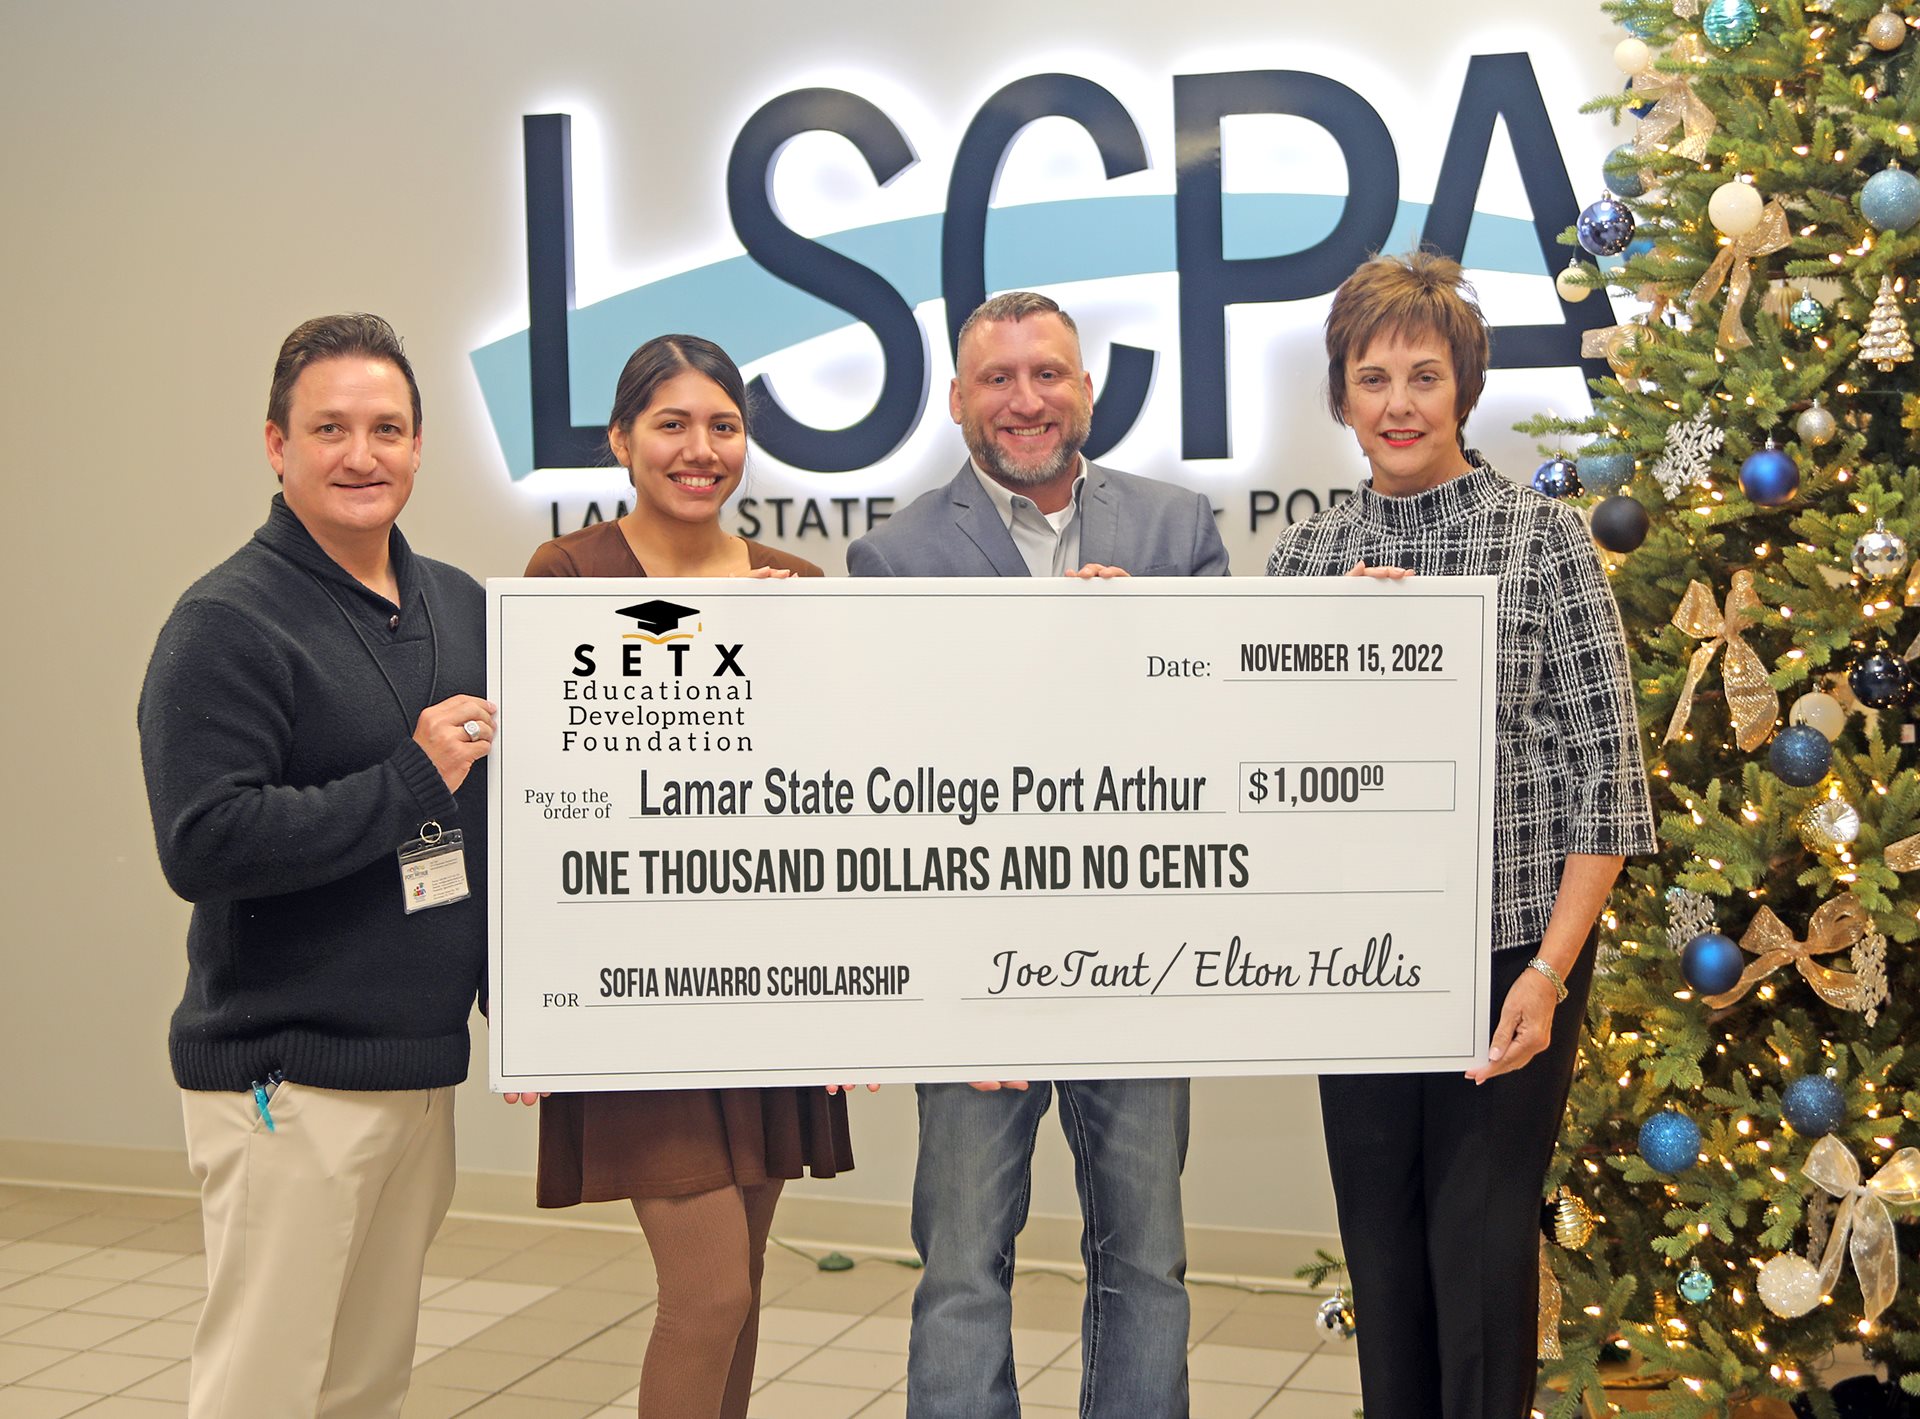 
The Southeast Texas Educational Development Foundation recently presented a scholarship check for $1,000 to Lamar State College Port Arthur in honor of Sofia Navarro. Pictured, from left, are Foundation President Joe Tant, Sofia